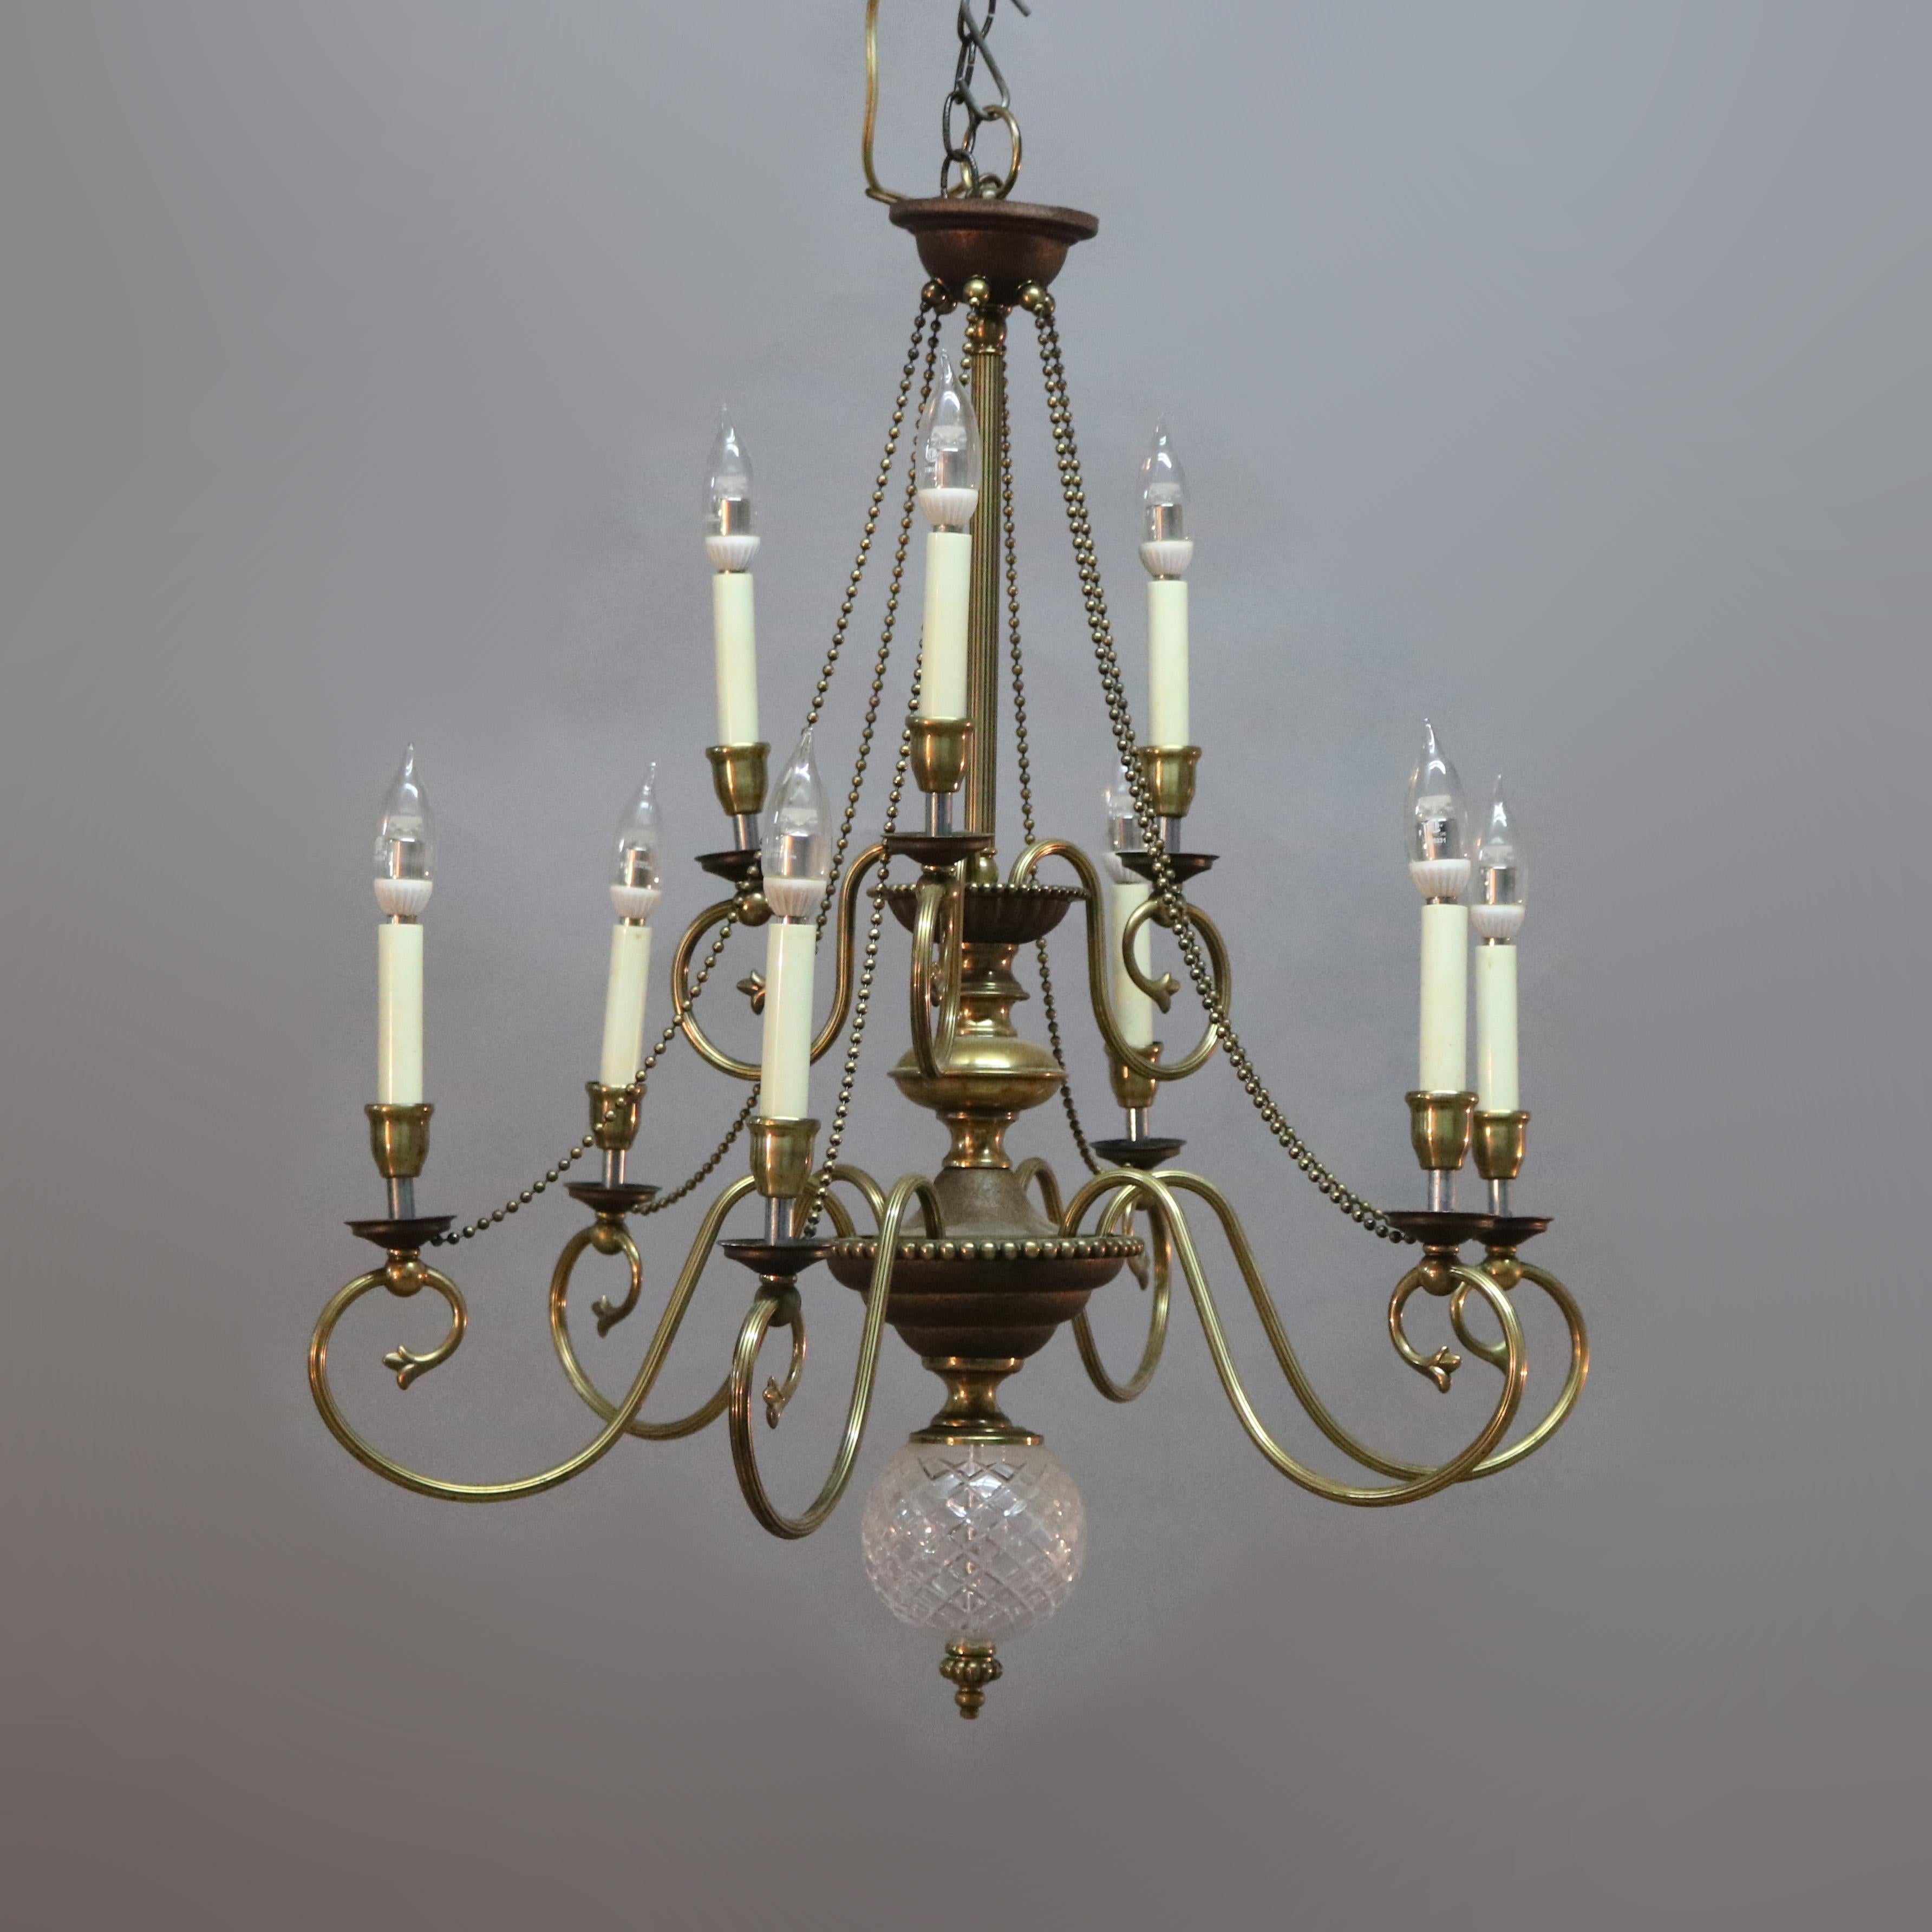 A vintage French chandelier offers tiered brass frame with scroll form arms terminating in nine candle lights with strung bead garland and crystal drop finial, 20th century

Measures: 30.5